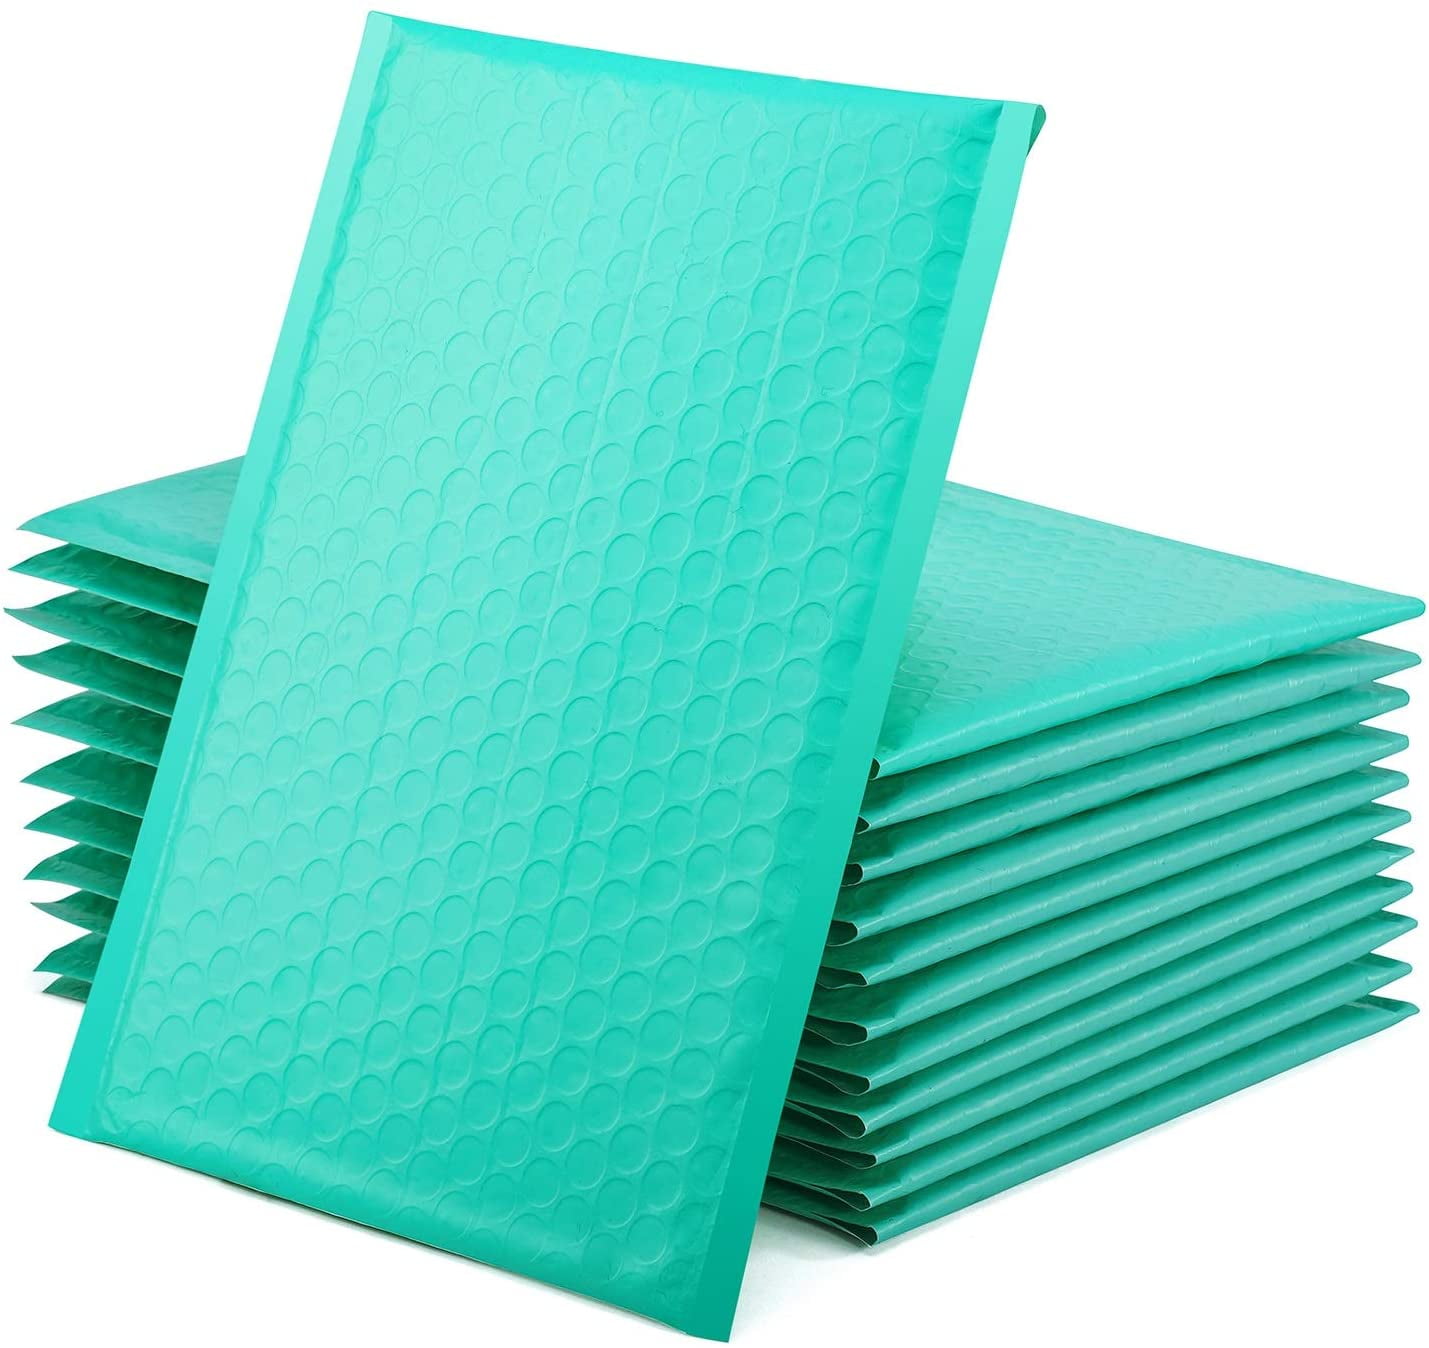 20 EcoSwift Size #2 8.5x12 Medium Poly Bubble Mailers Padded Envelope Shipping Supply Bags 8.5 x 12 inches